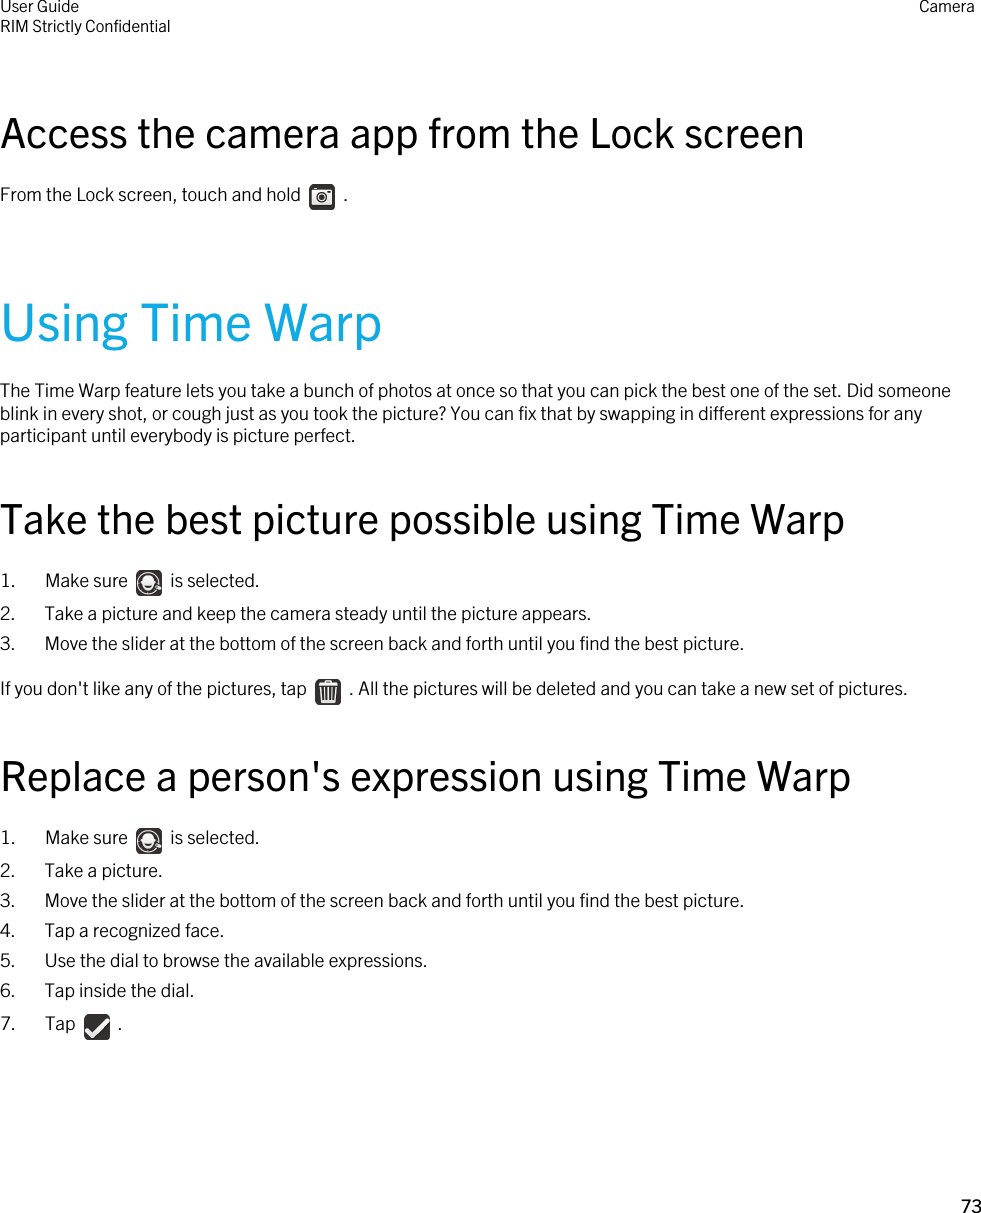 Access the camera app from the Lock screenFrom the Lock screen, touch and hold    .Using Time WarpThe Time Warp feature lets you take a bunch of photos at once so that you can pick the best one of the set. Did someone blink in every shot, or cough just as you took the picture? You can fix that by swapping in different expressions for any participant until everybody is picture perfect.Take the best picture possible using Time Warp1.  Make sure    is selected.2. Take a picture and keep the camera steady until the picture appears.3. Move the slider at the bottom of the screen back and forth until you find the best picture.If you don&apos;t like any of the pictures, tap    . All the pictures will be deleted and you can take a new set of pictures.Replace a person&apos;s expression using Time Warp1.  Make sure    is selected.2. Take a picture.3. Move the slider at the bottom of the screen back and forth until you find the best picture.4. Tap a recognized face.5. Use the dial to browse the available expressions.6. Tap inside the dial.7.  Tap    .User GuideRIM Strictly Confidential Camera73 